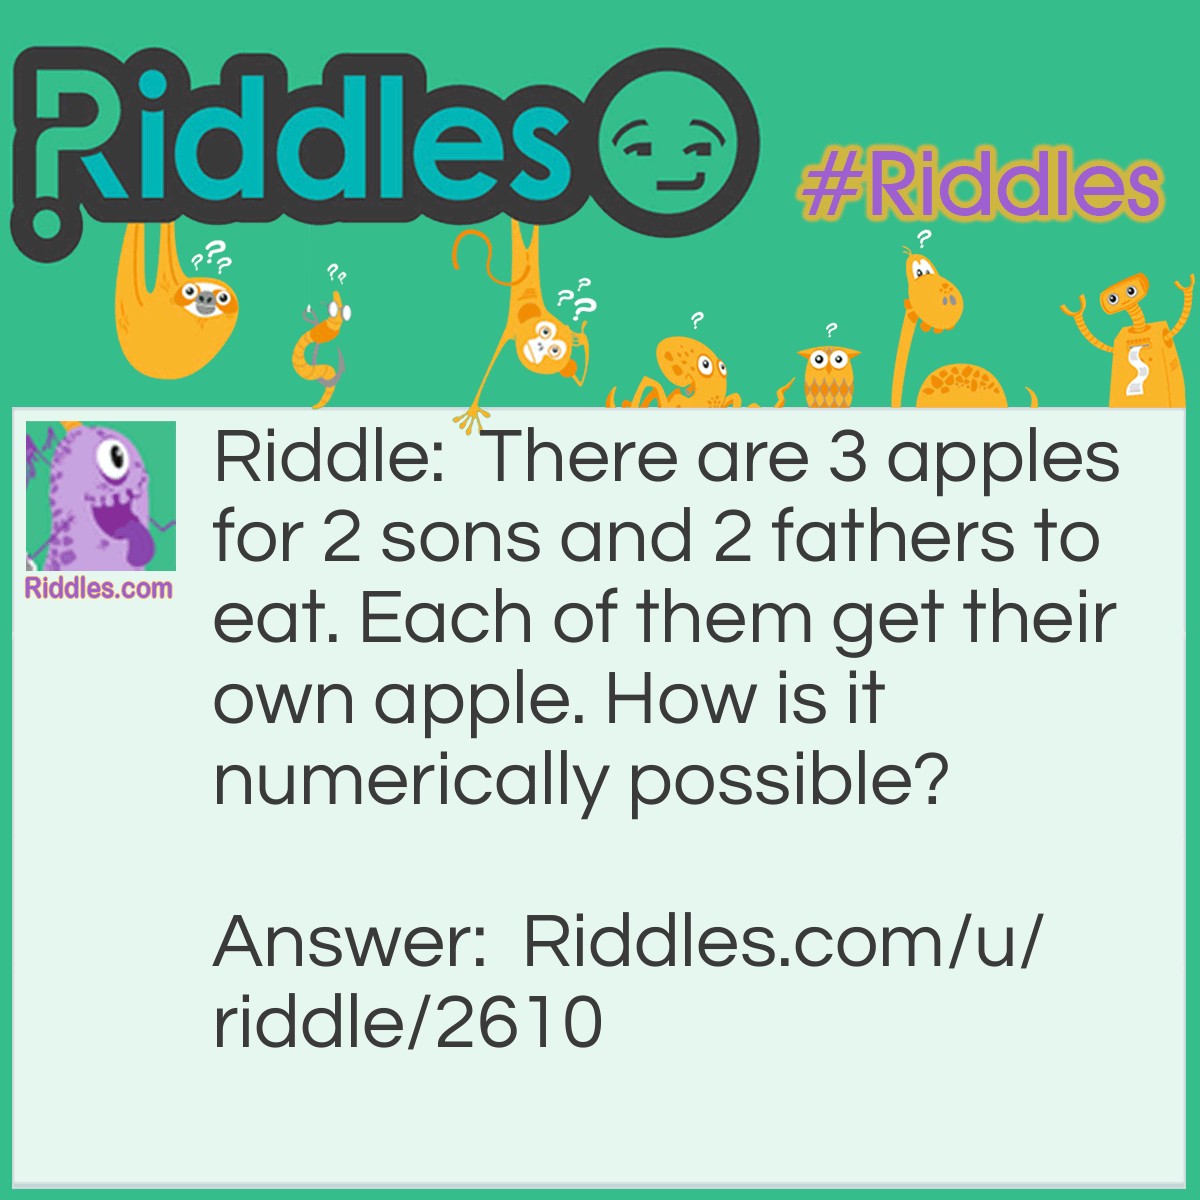 Riddle: There are 3 apples for 2 sons and 2 fathers to eat. Each of them get their own apple. How is it numerically possible? Answer: They are one son, one father and one grandfather.